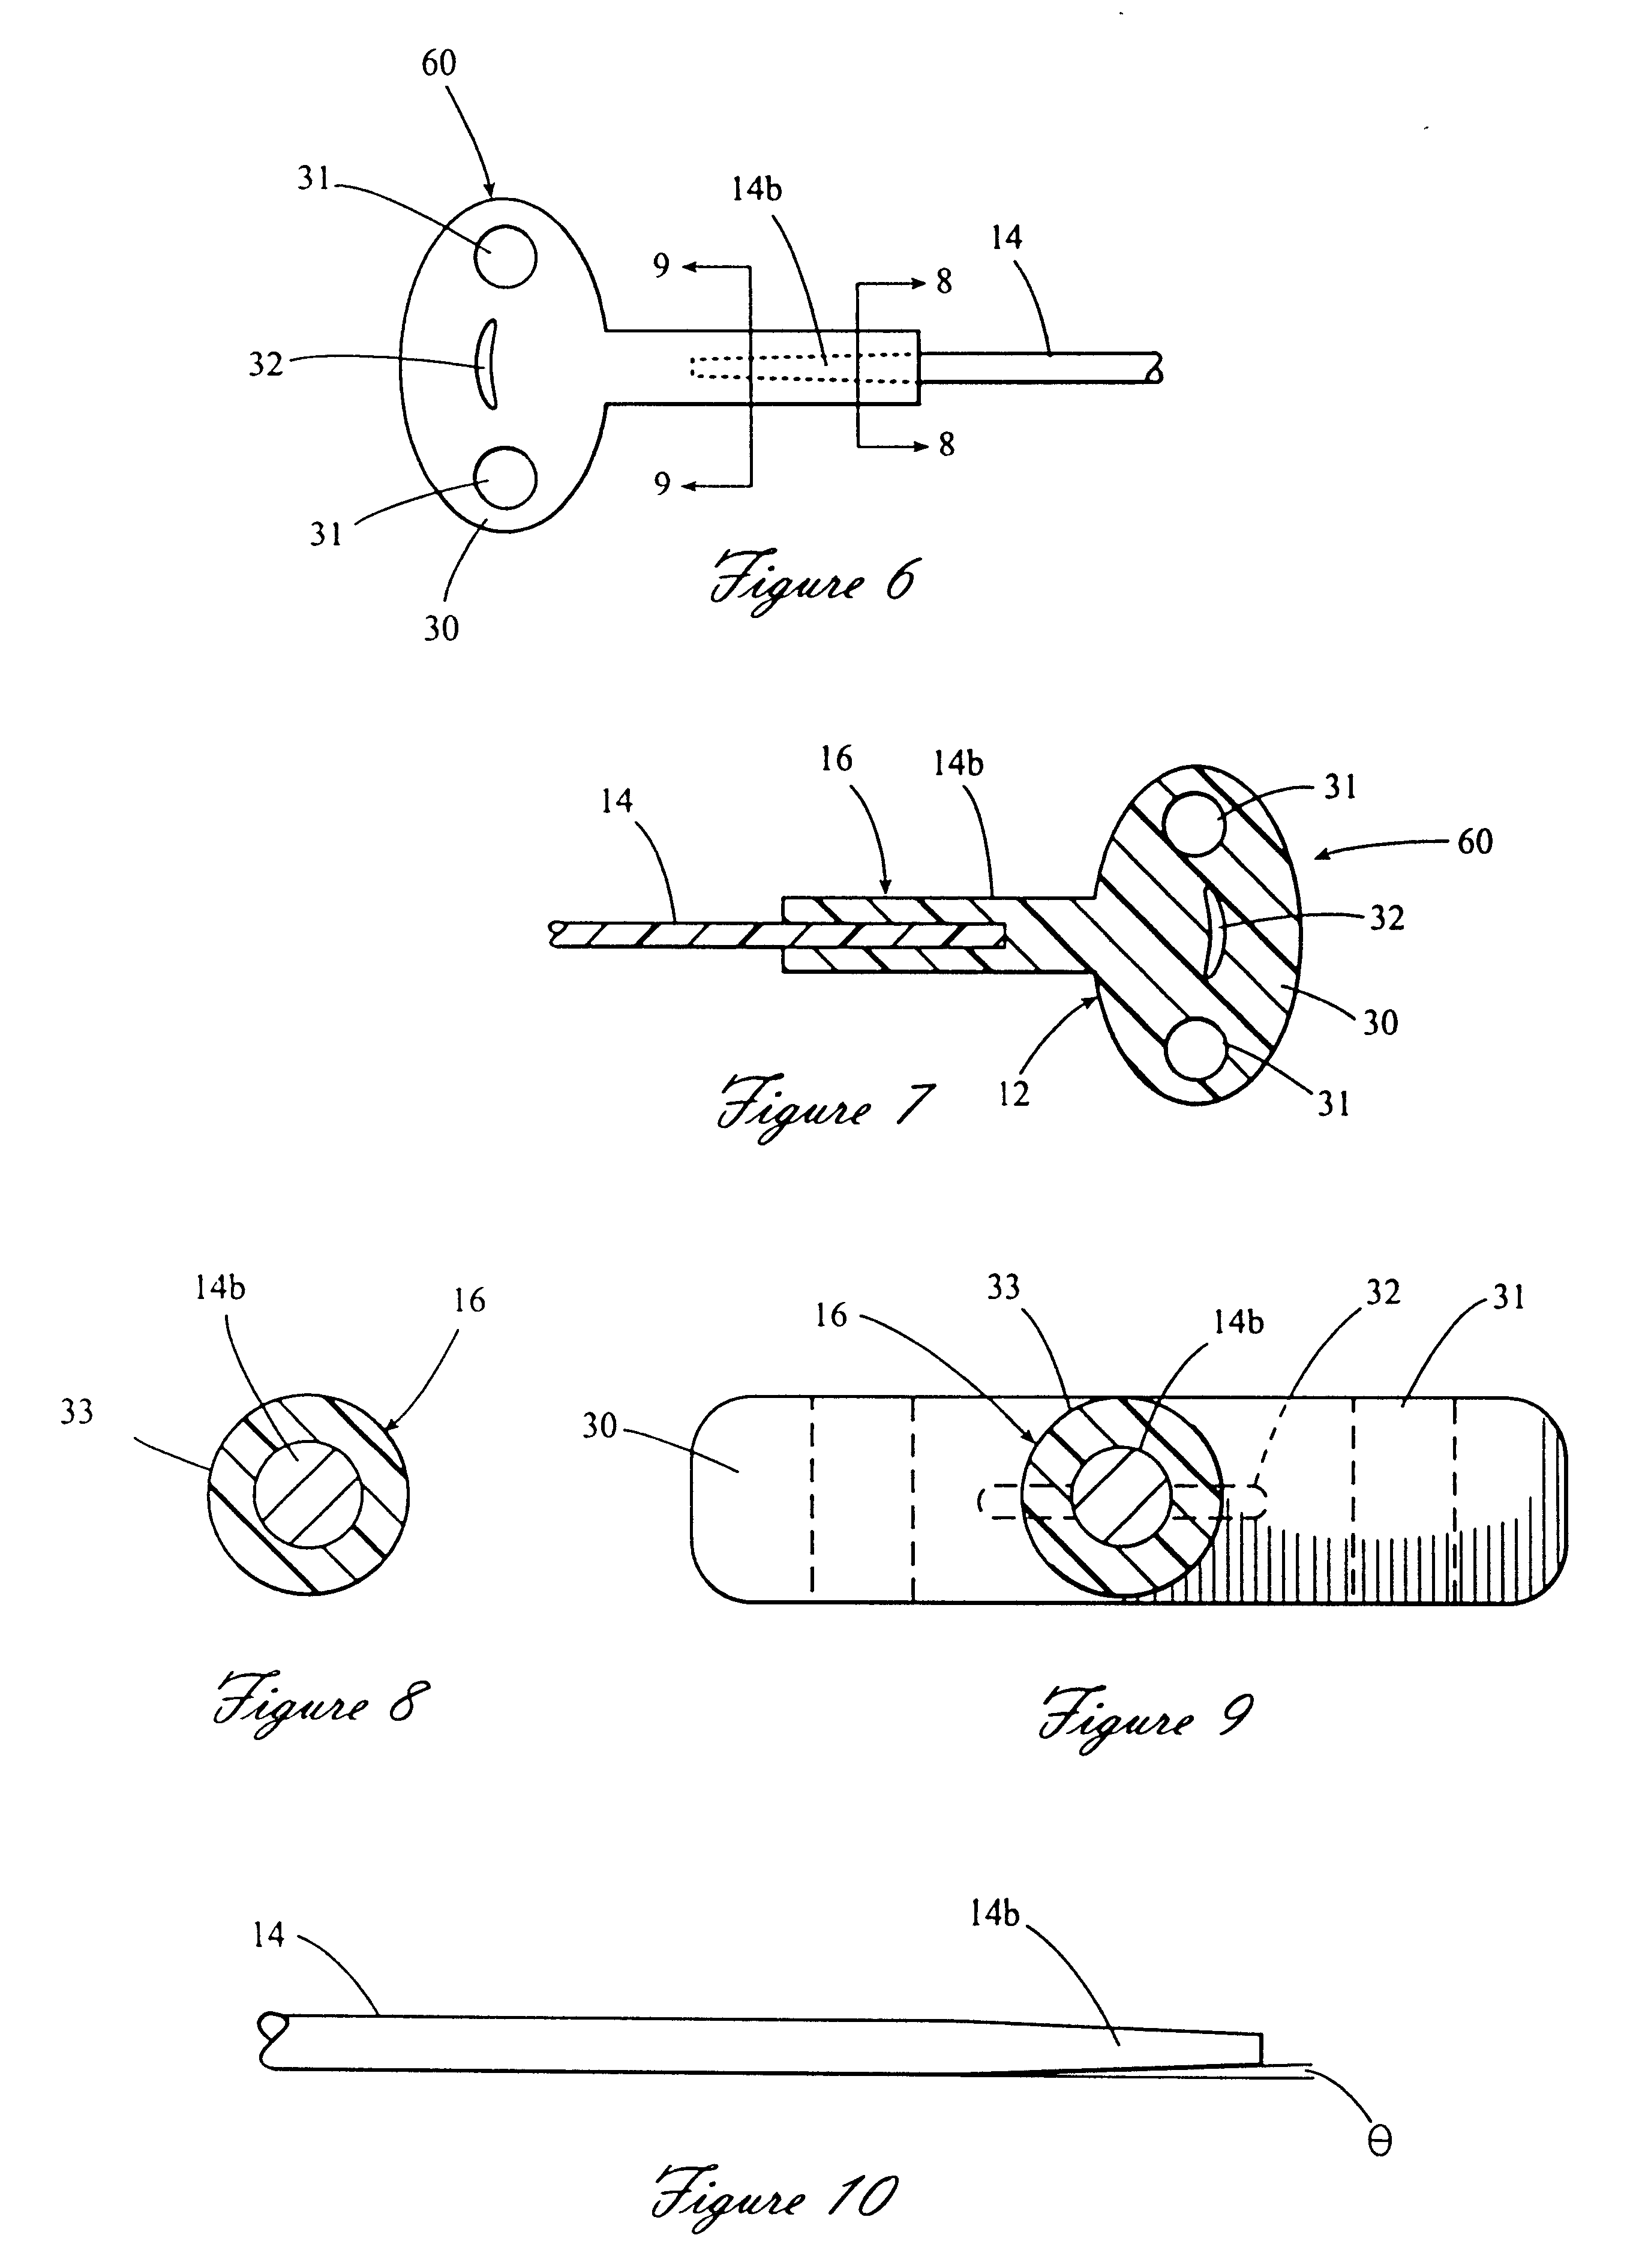 Distraction osteogenesis device and method